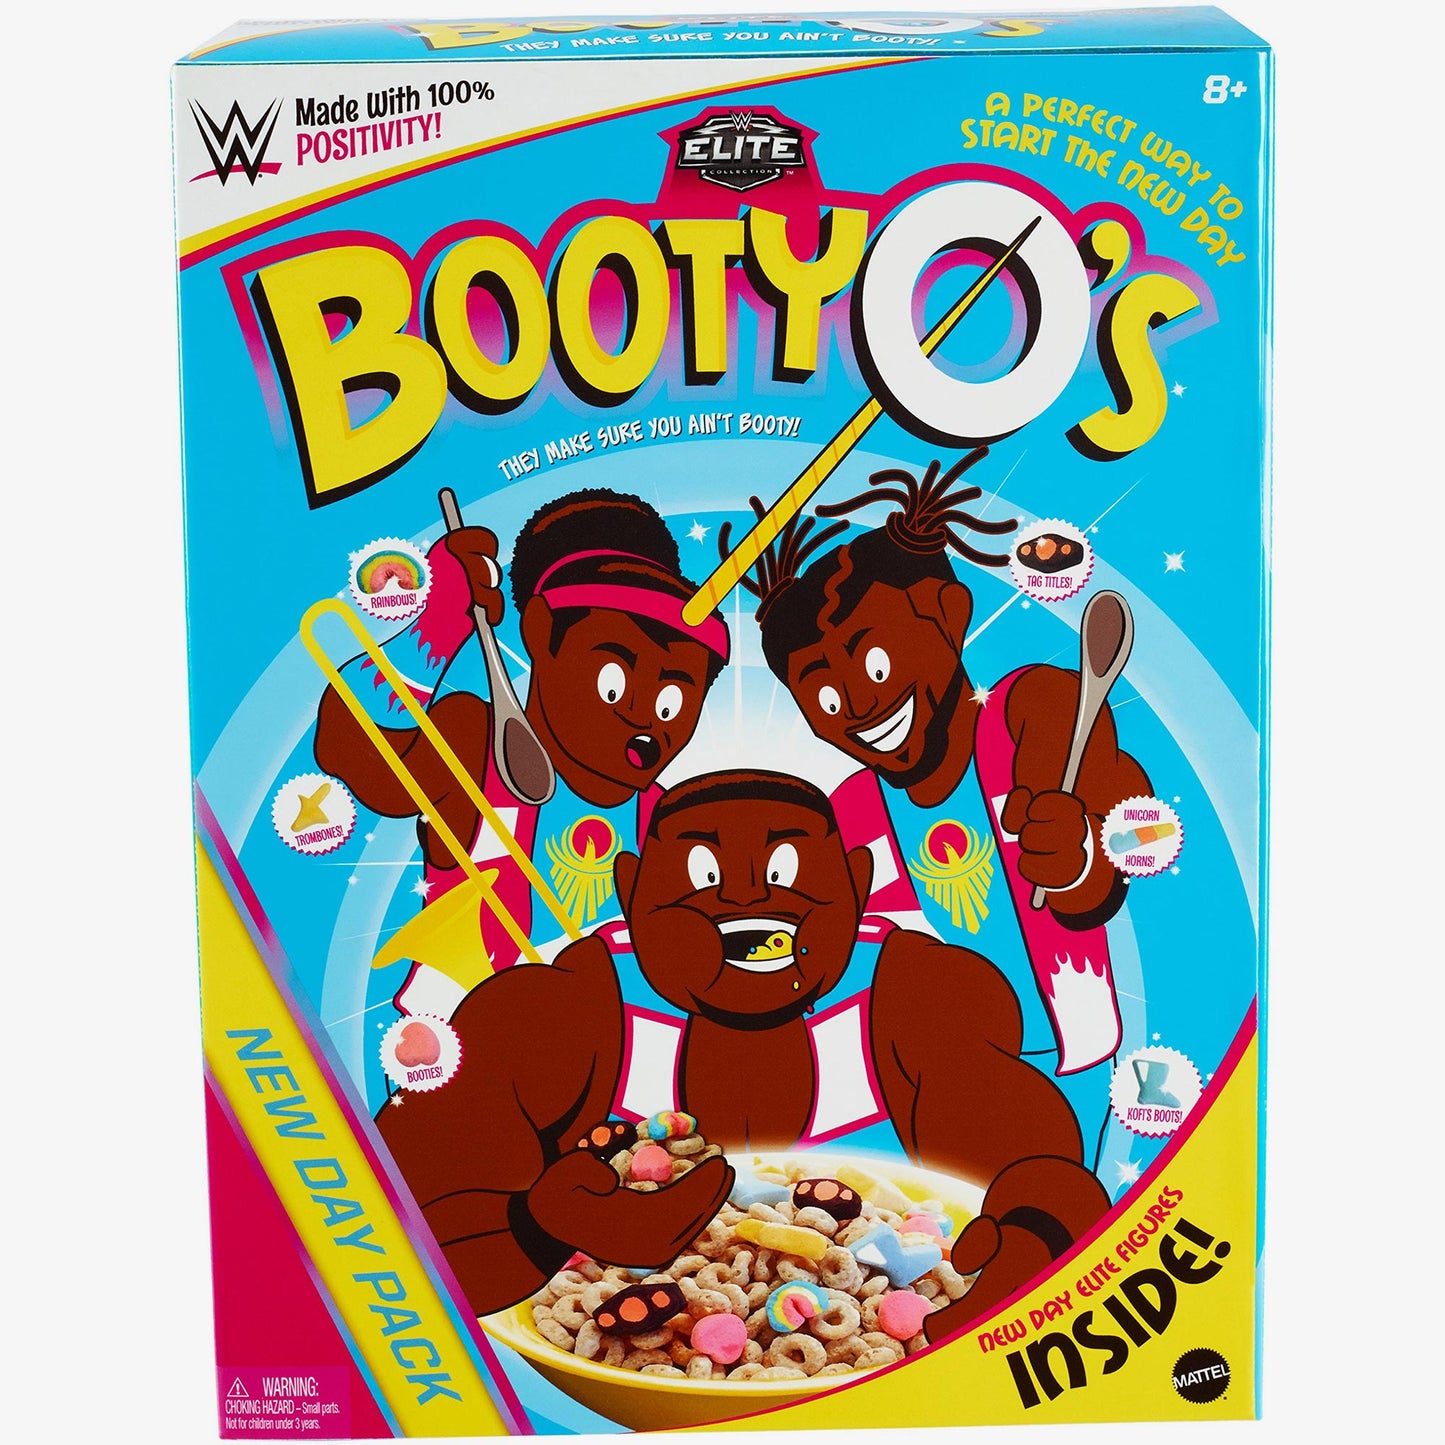 The New Day Booty O's Cereal Box - WWE Elite Collection (3-Pack)